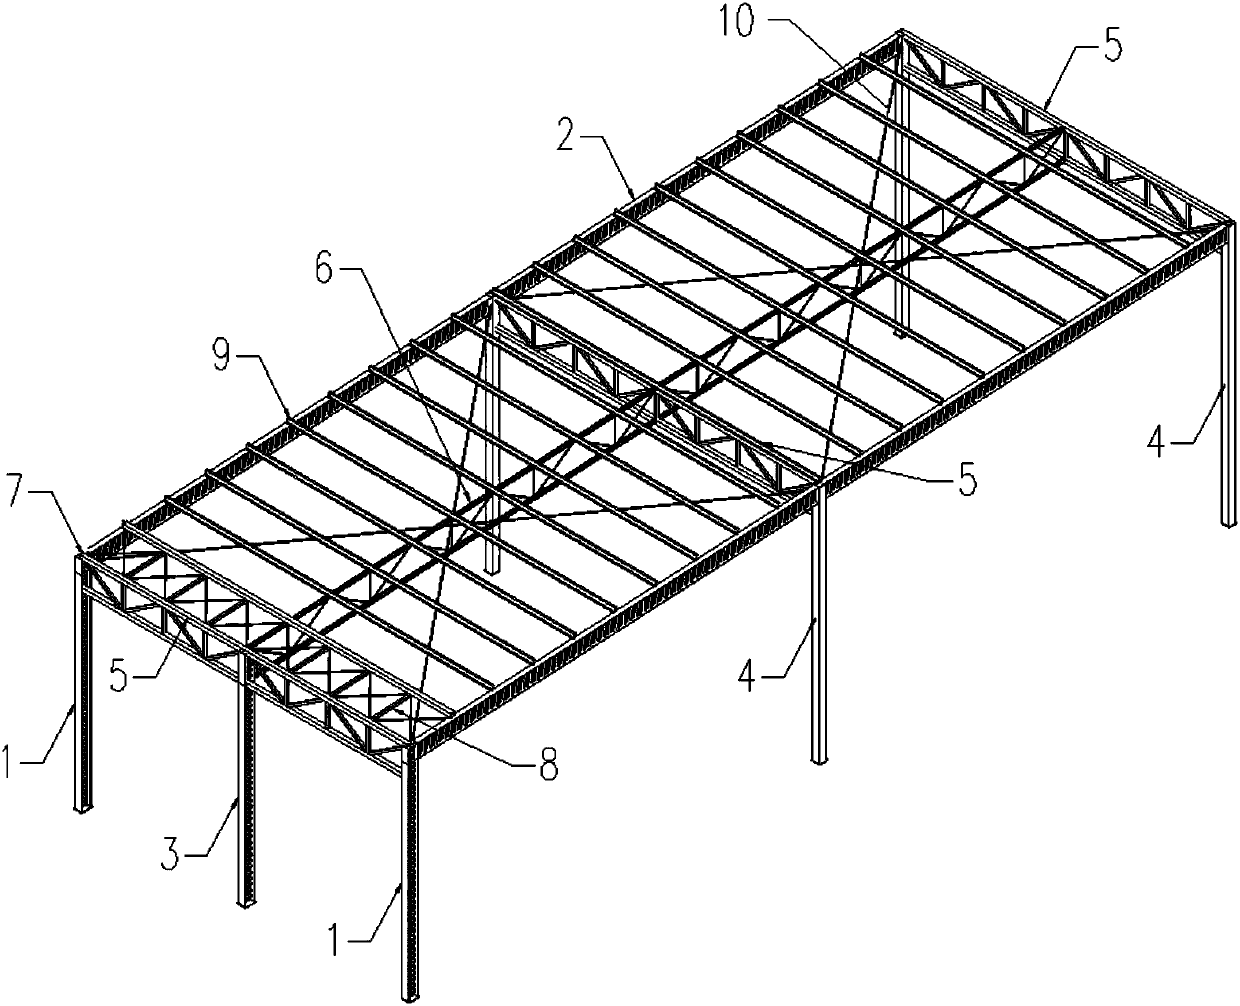 Building system combined truss with steel shaped like Chinese character 'zhi'